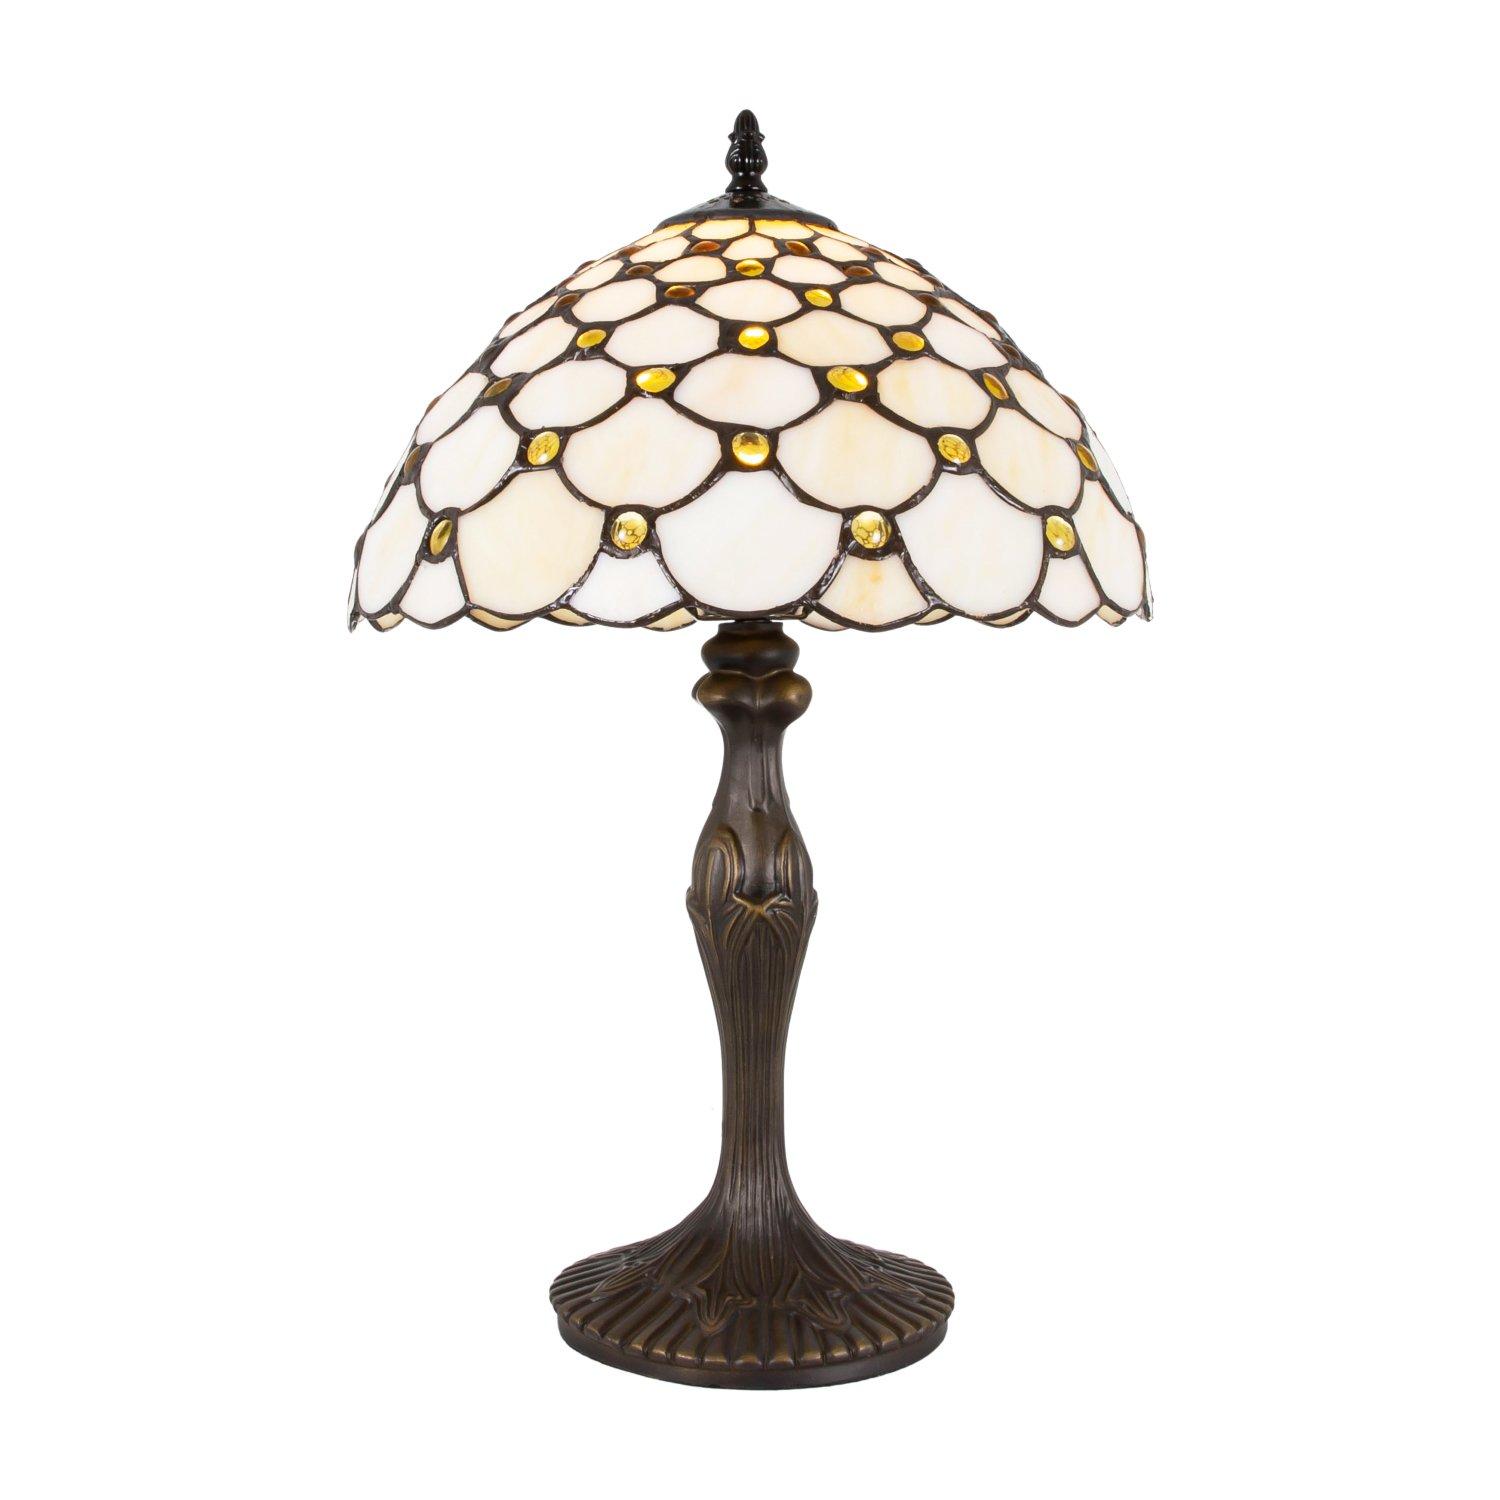 Traditional Tiffany Table Lamp with Multiple Circular Beads